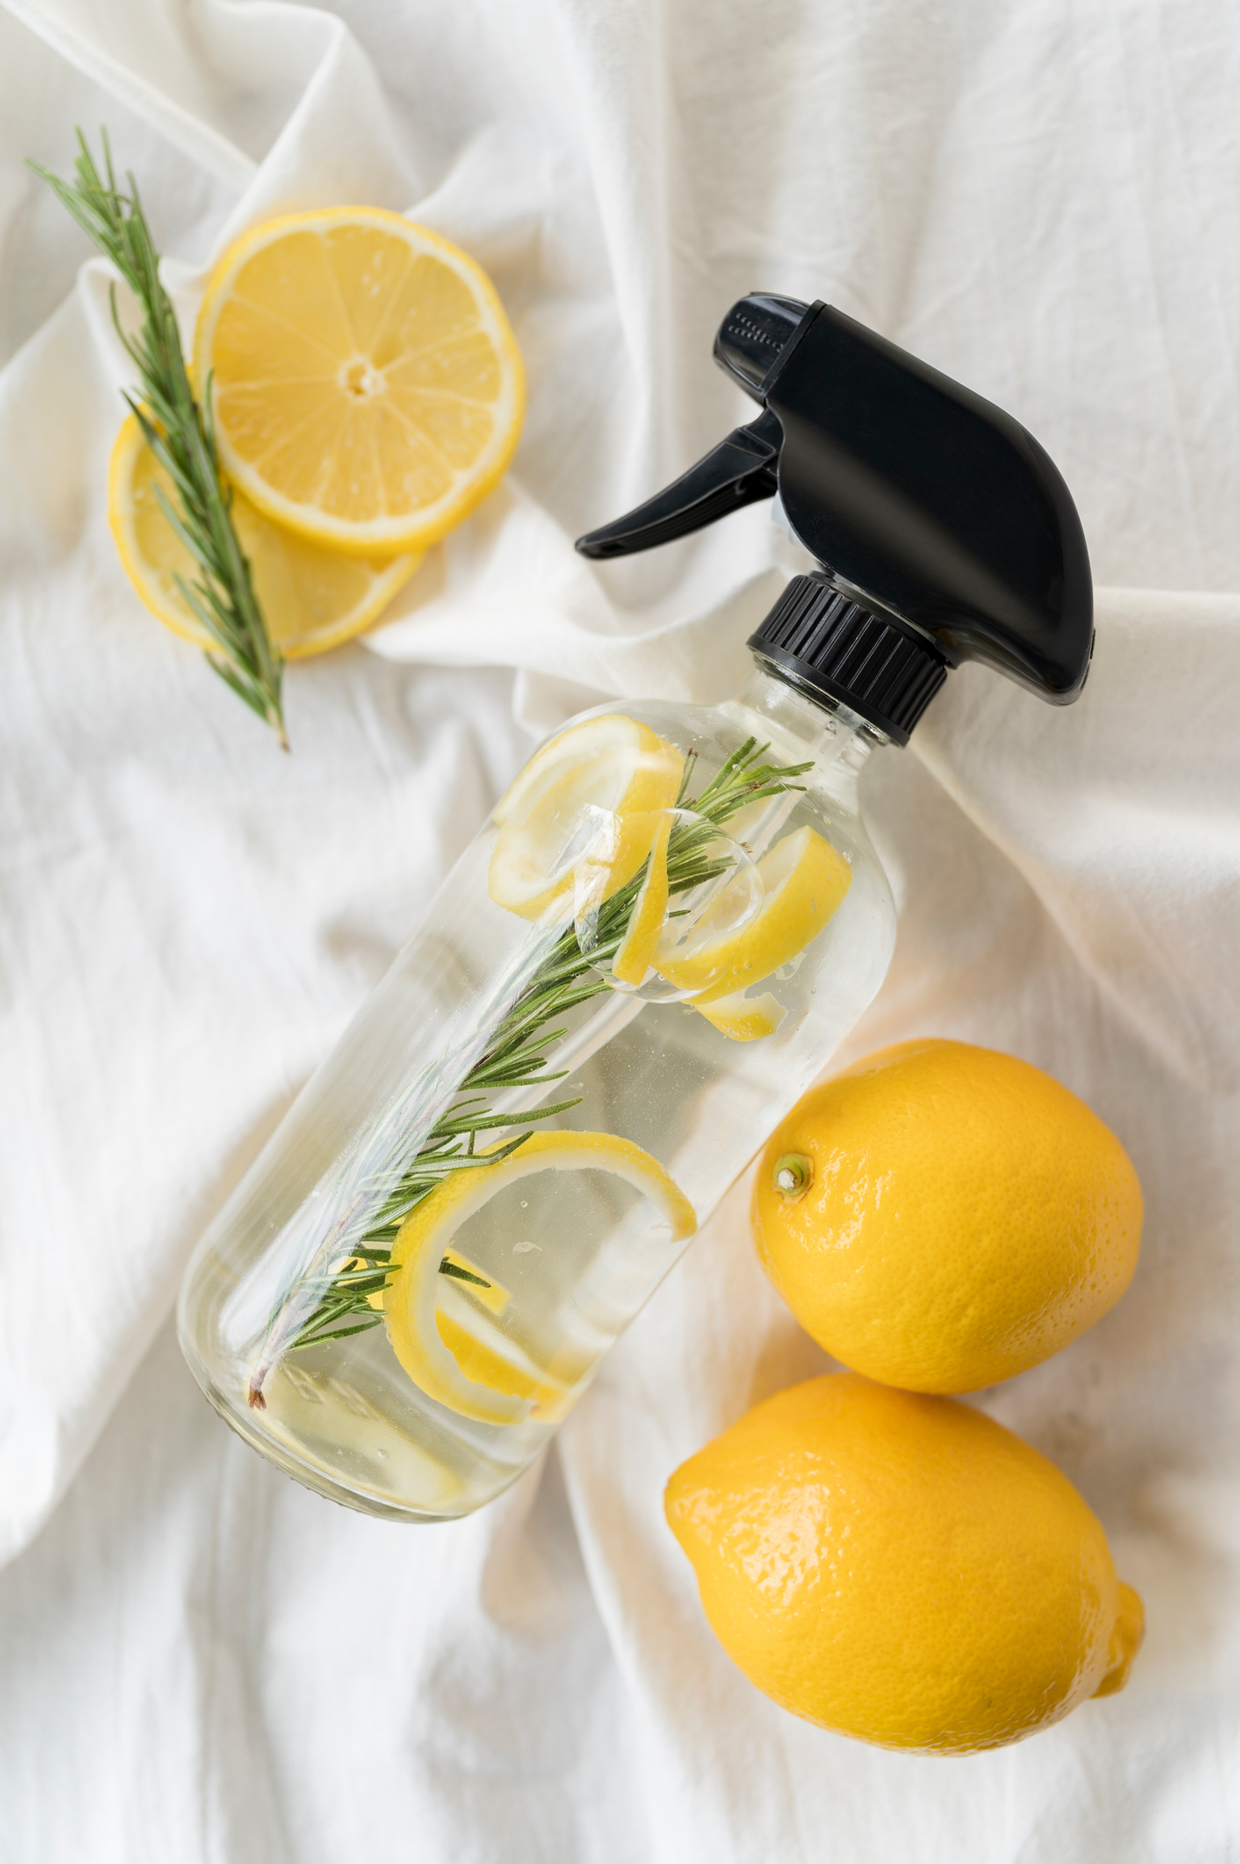 Homemade natural cleaning spray with lemon